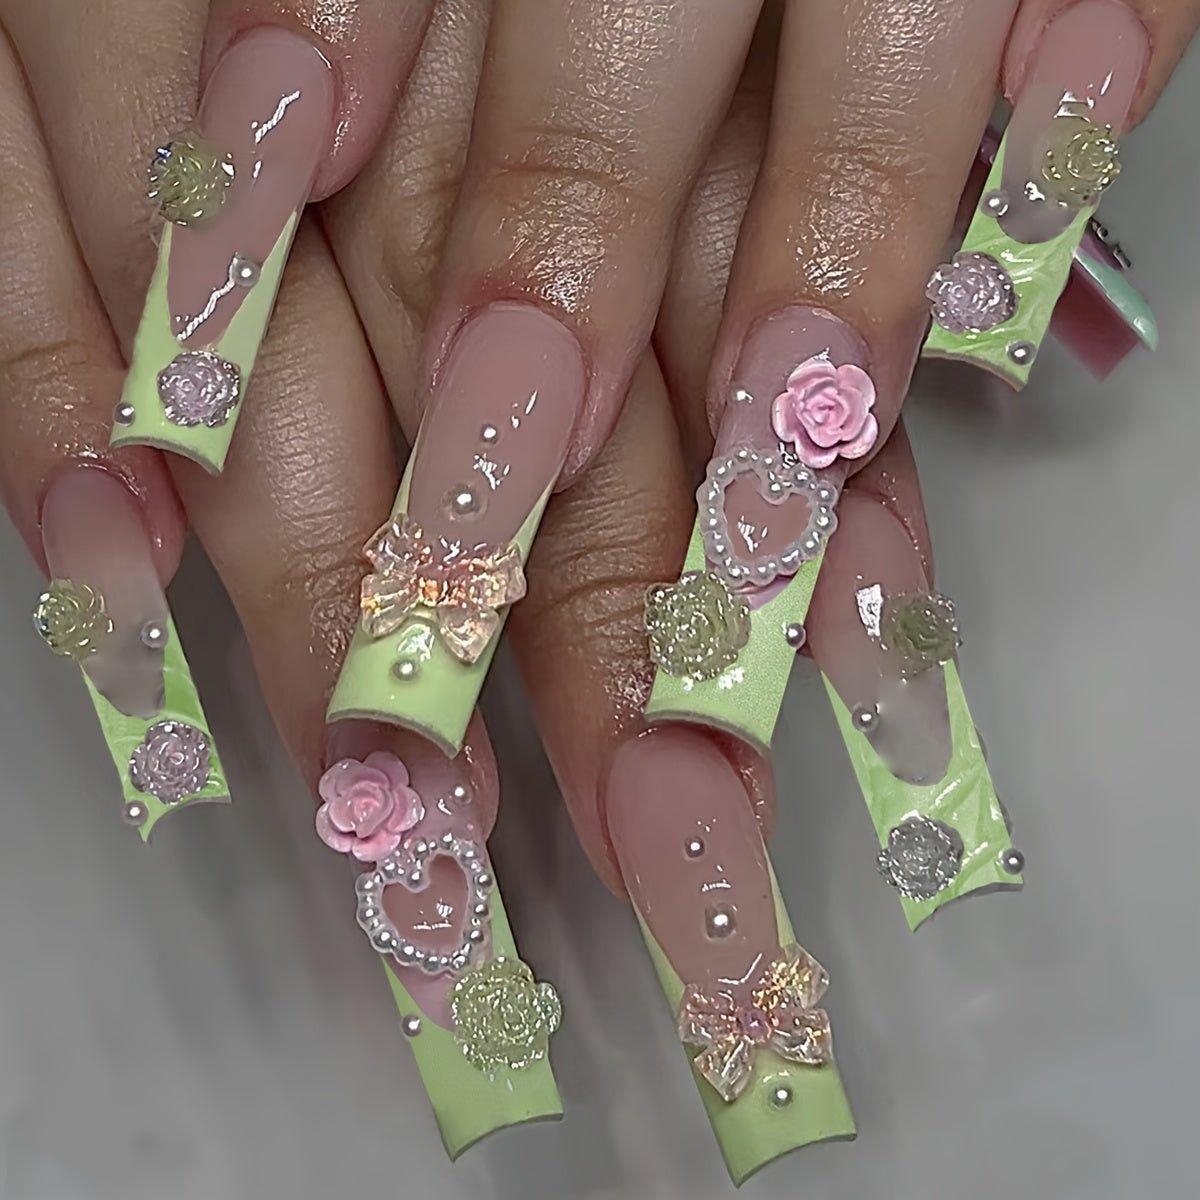 Elegant 24pcs 3D Aurora Press-On Nails Set – Long, Square-shaped, Pearlescent Green & Pink, Heart and Flower Patterns, Faux Pearl Accents, Comes with Jelly Glue & Nail File - J & B's Accessories